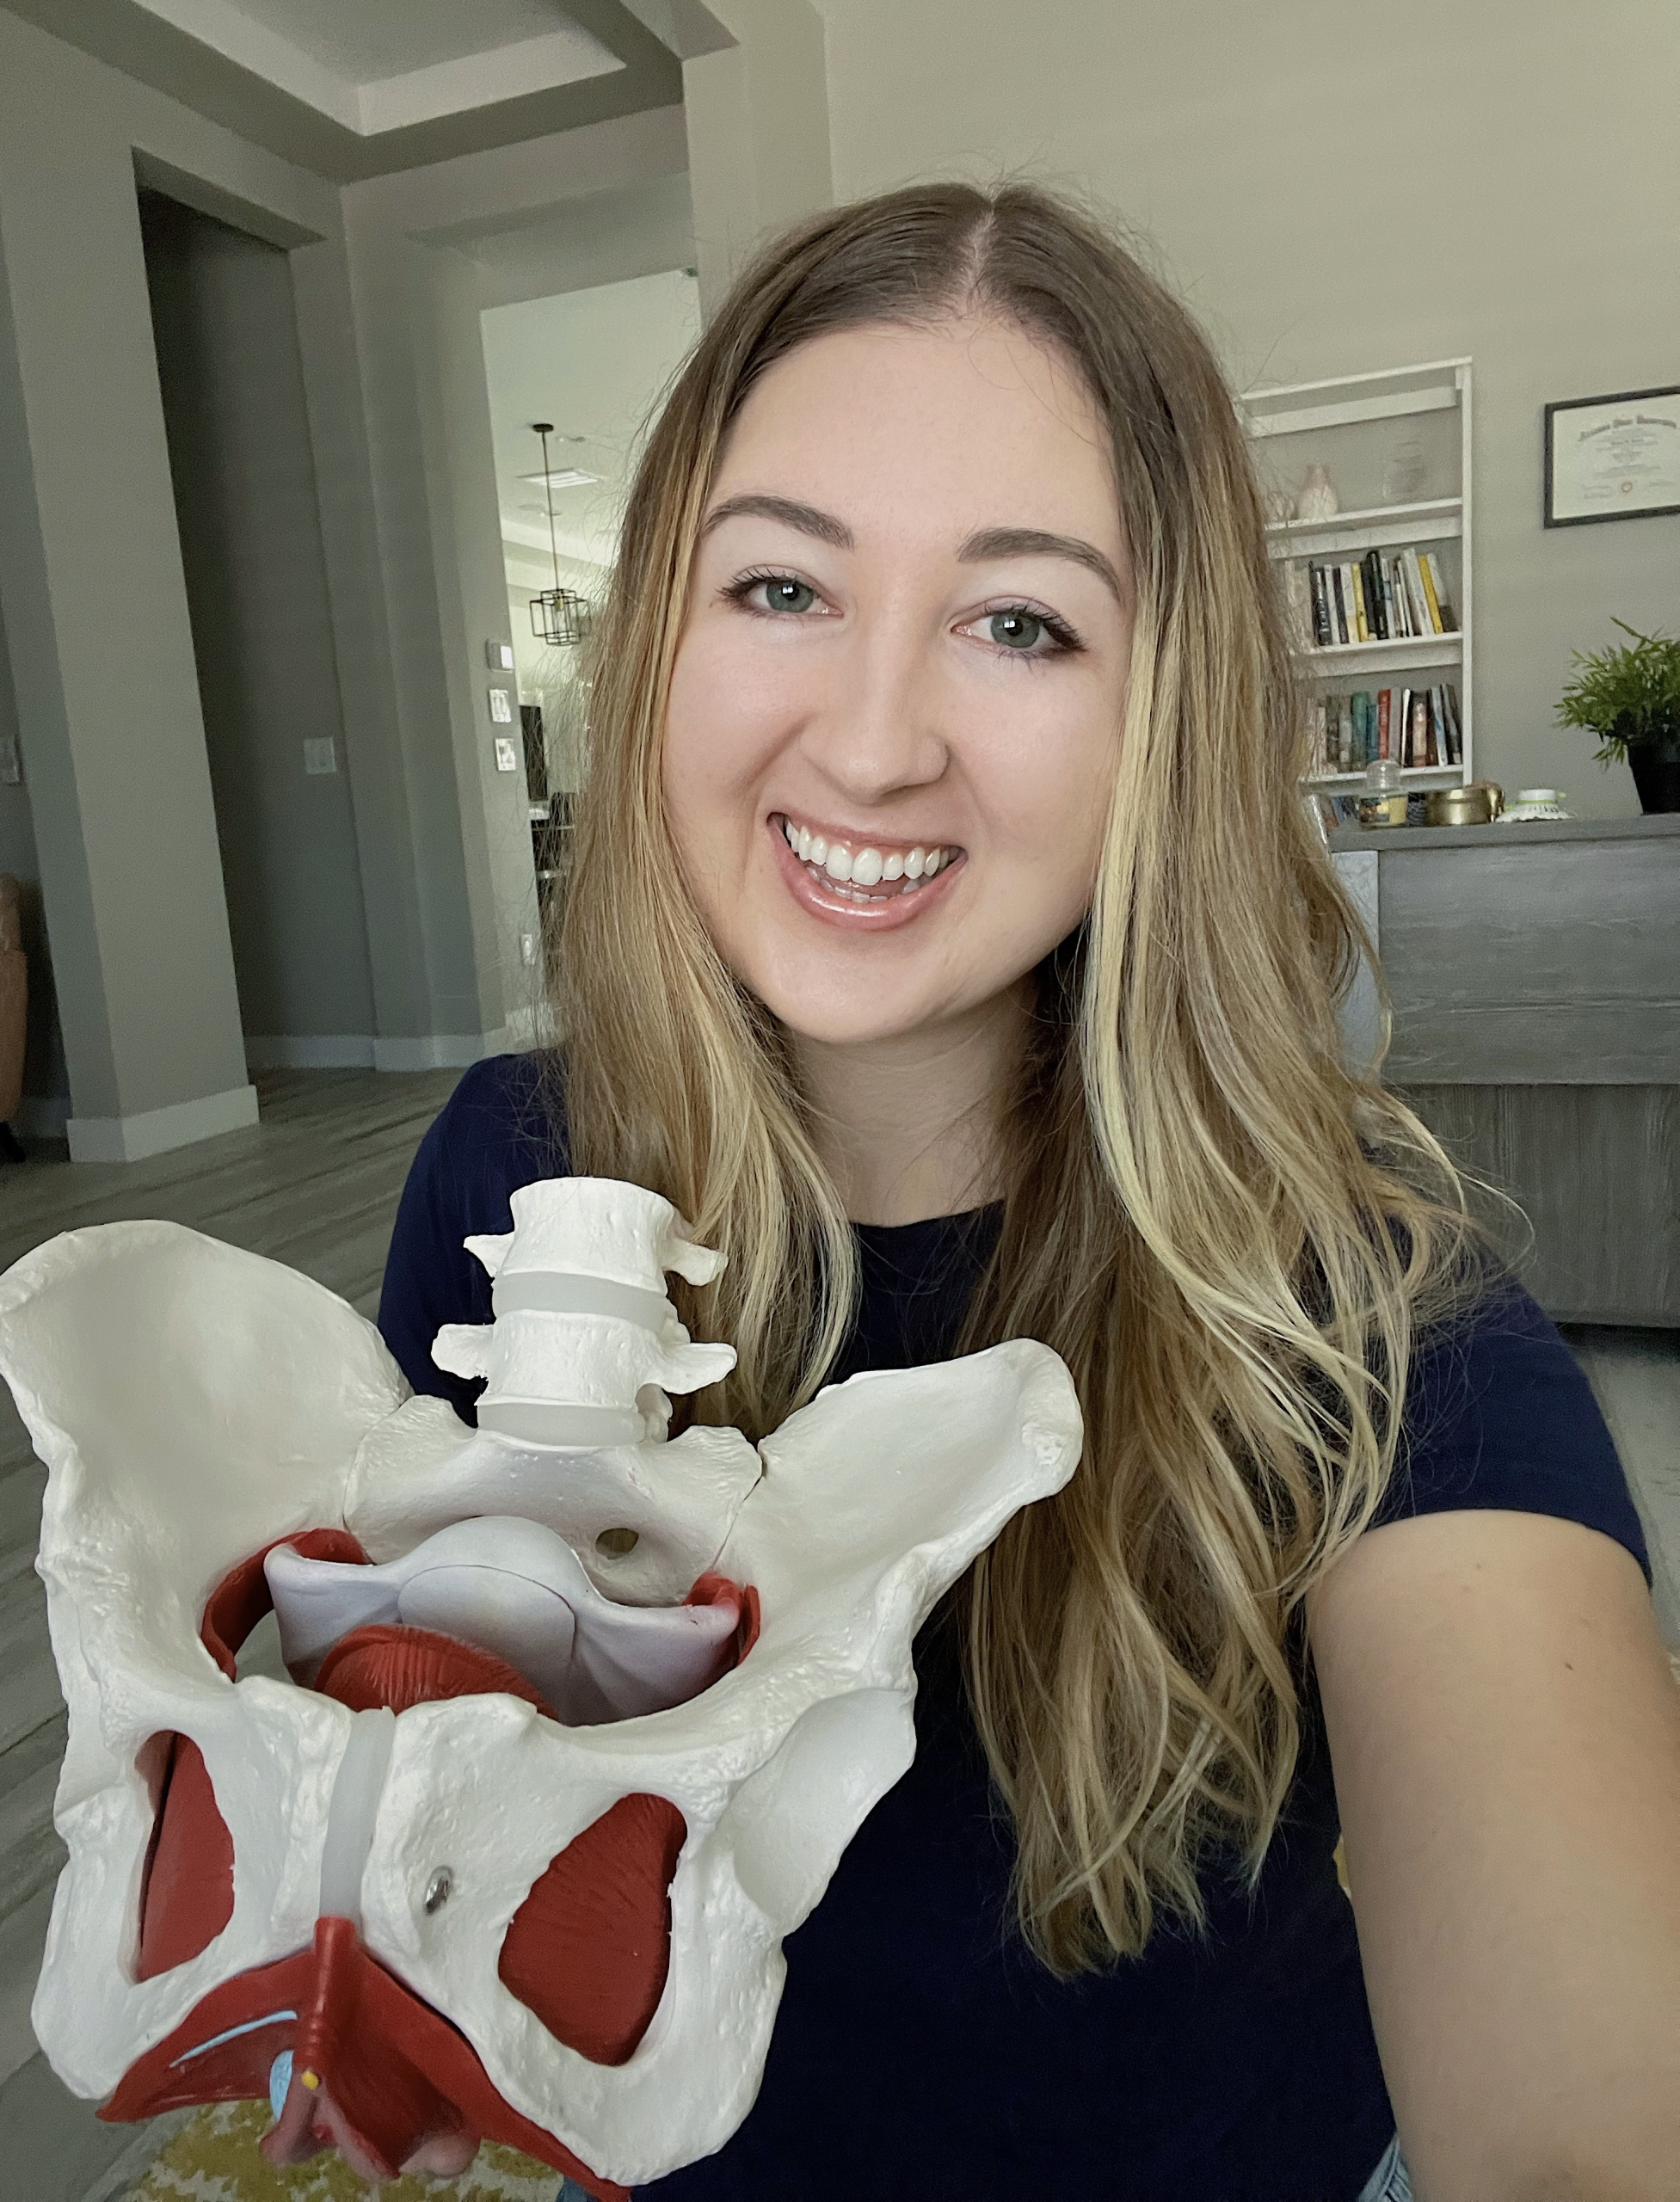 ATSU-ASHS student elected as Academy of Pelvic Health Physical Therapy Student Interest Group director